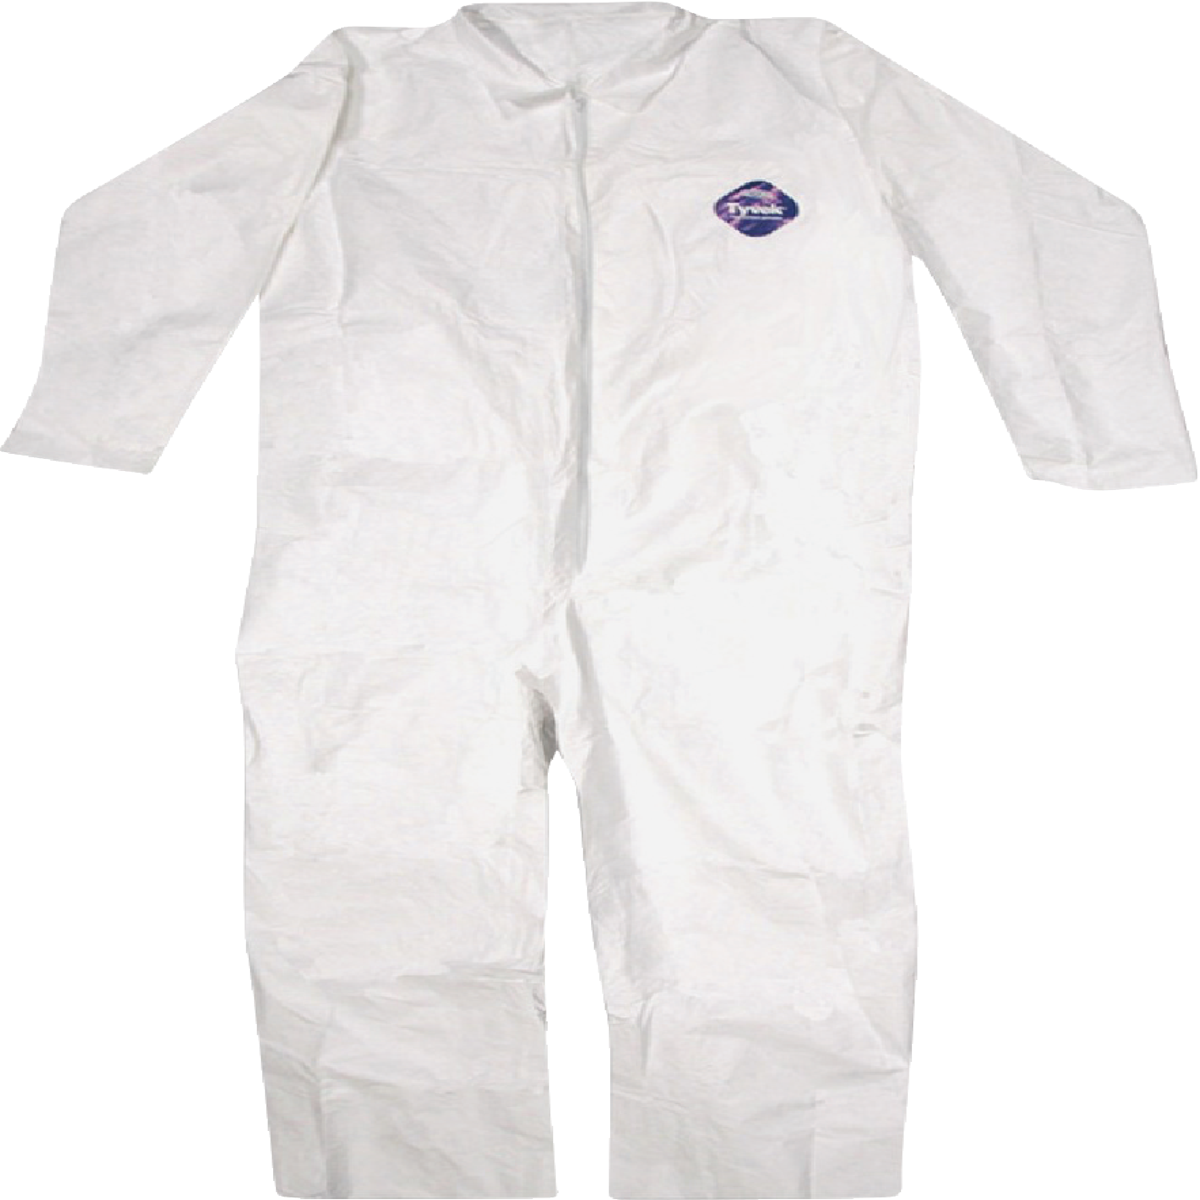 Painter's Coveralls